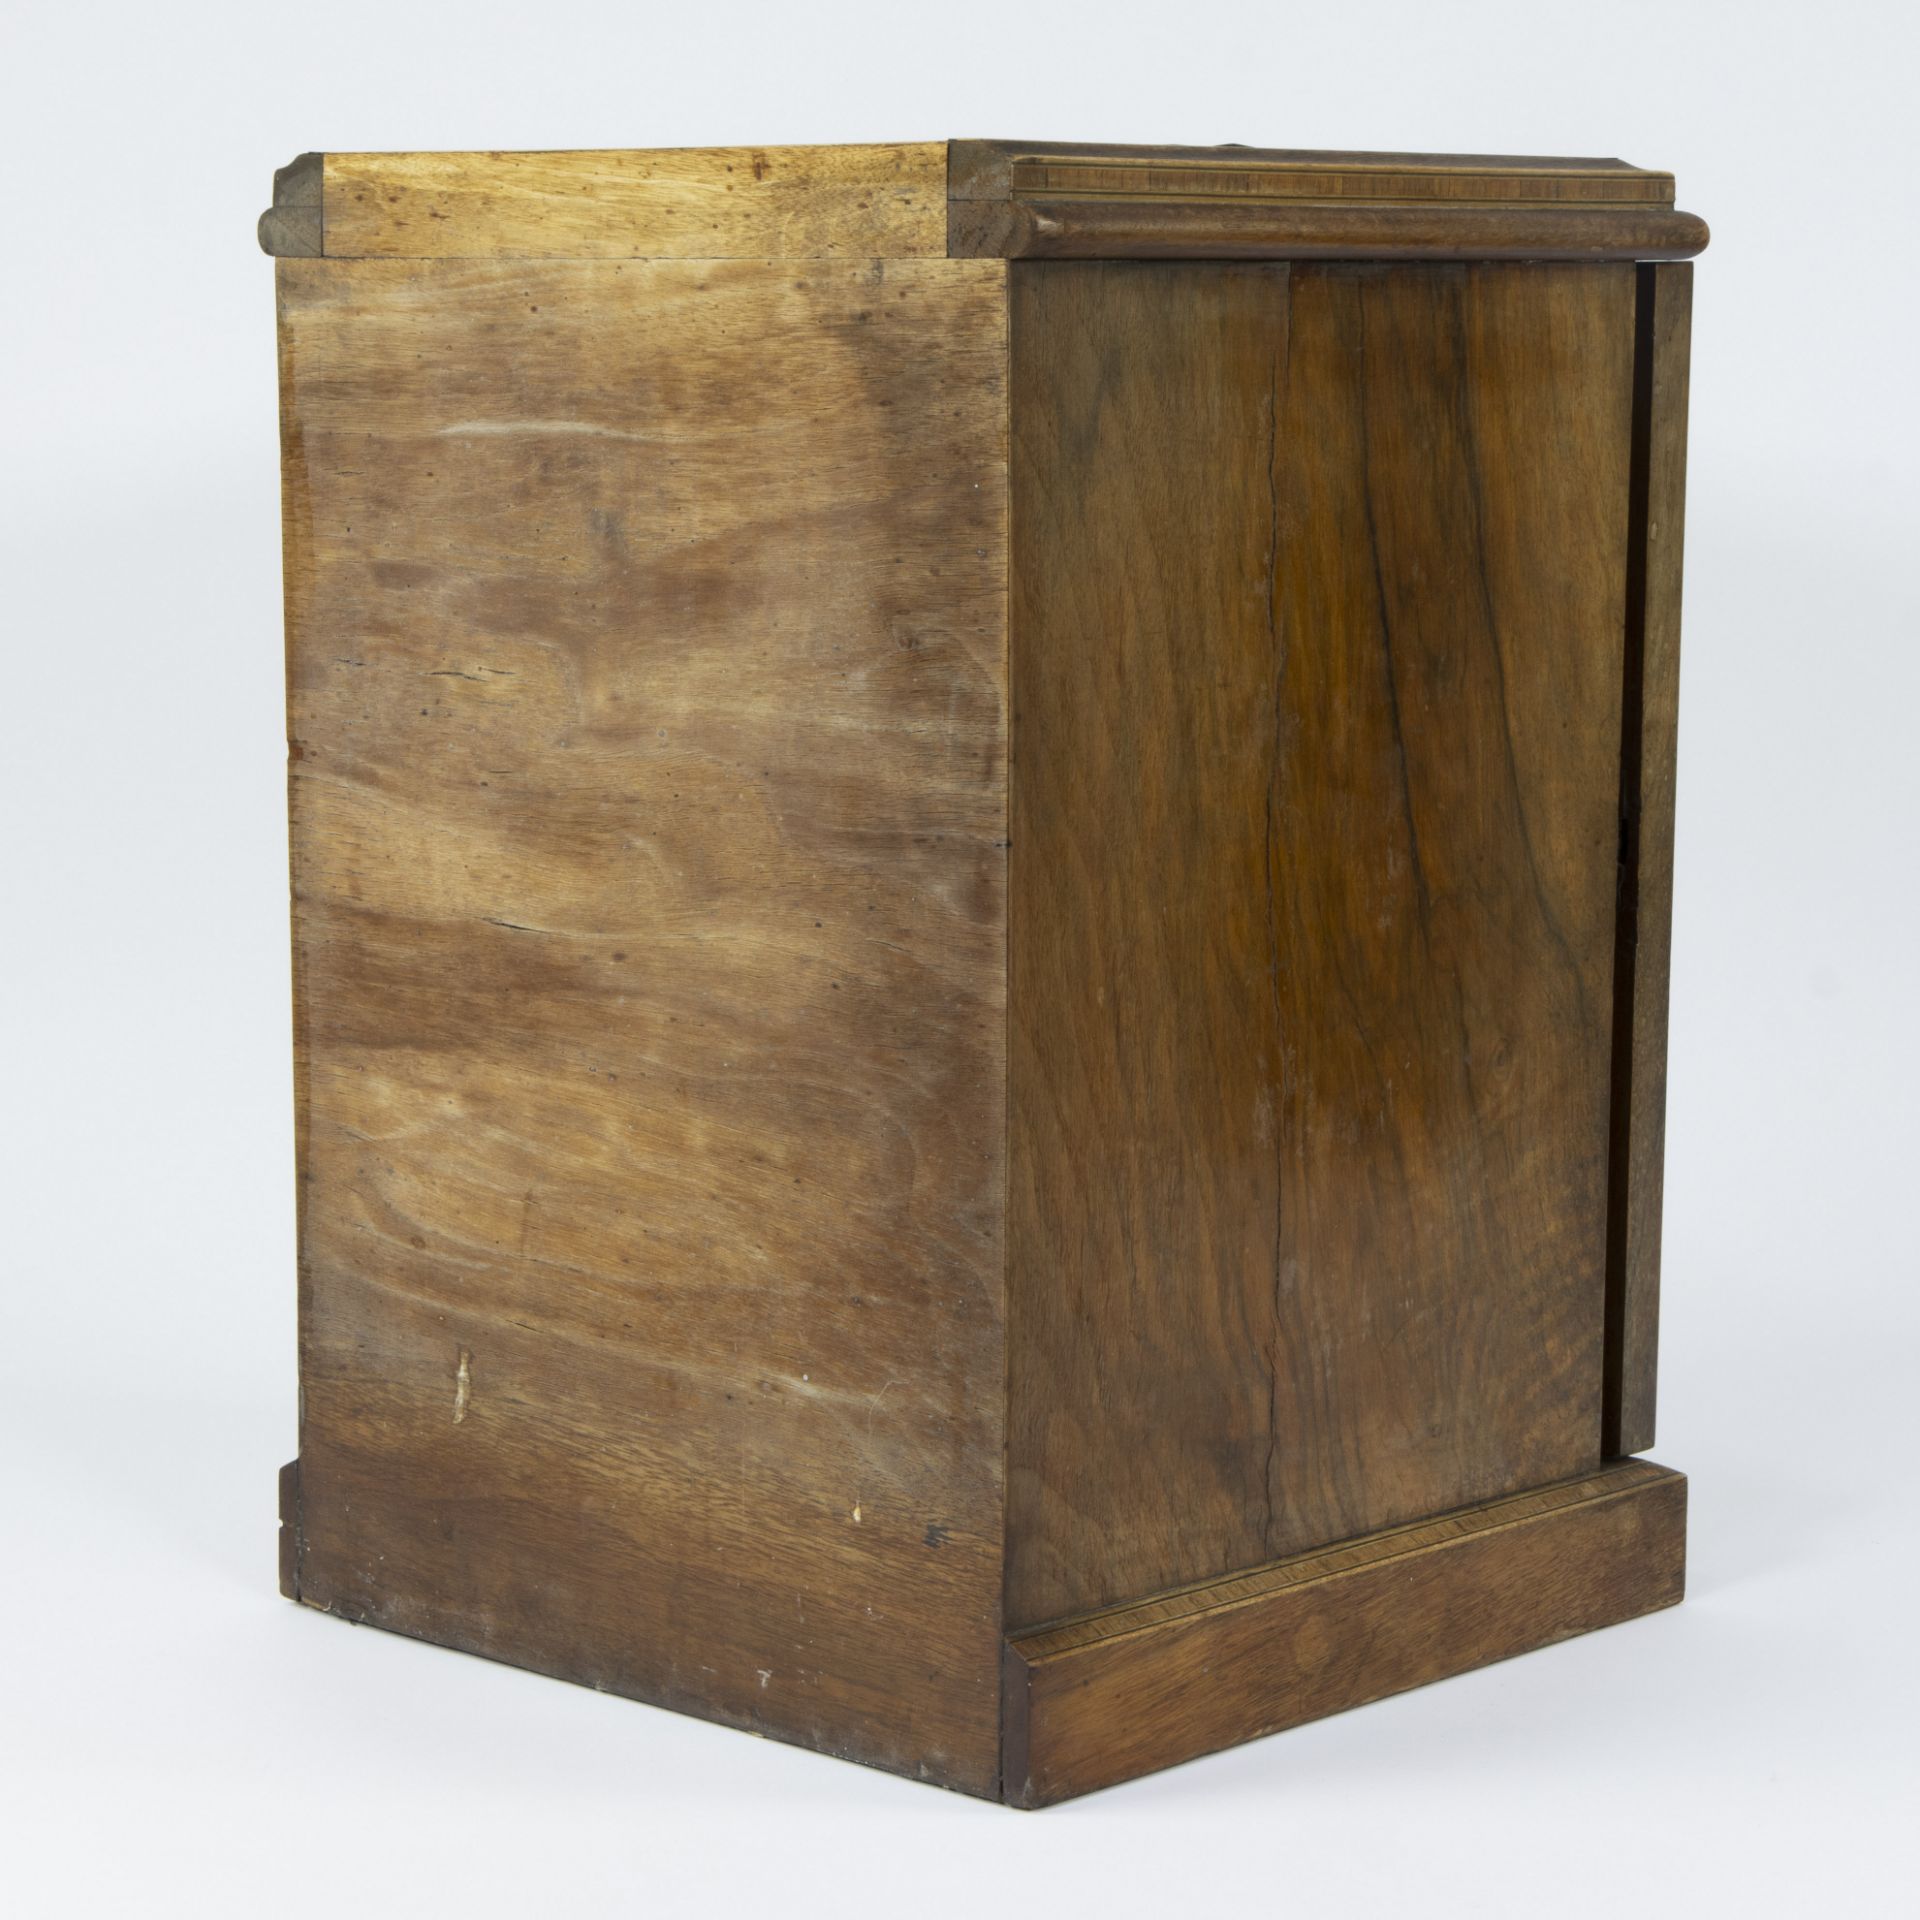 Small table showcase with marquetry, 3 drawers and engraved coat of arms on glass - Image 3 of 4